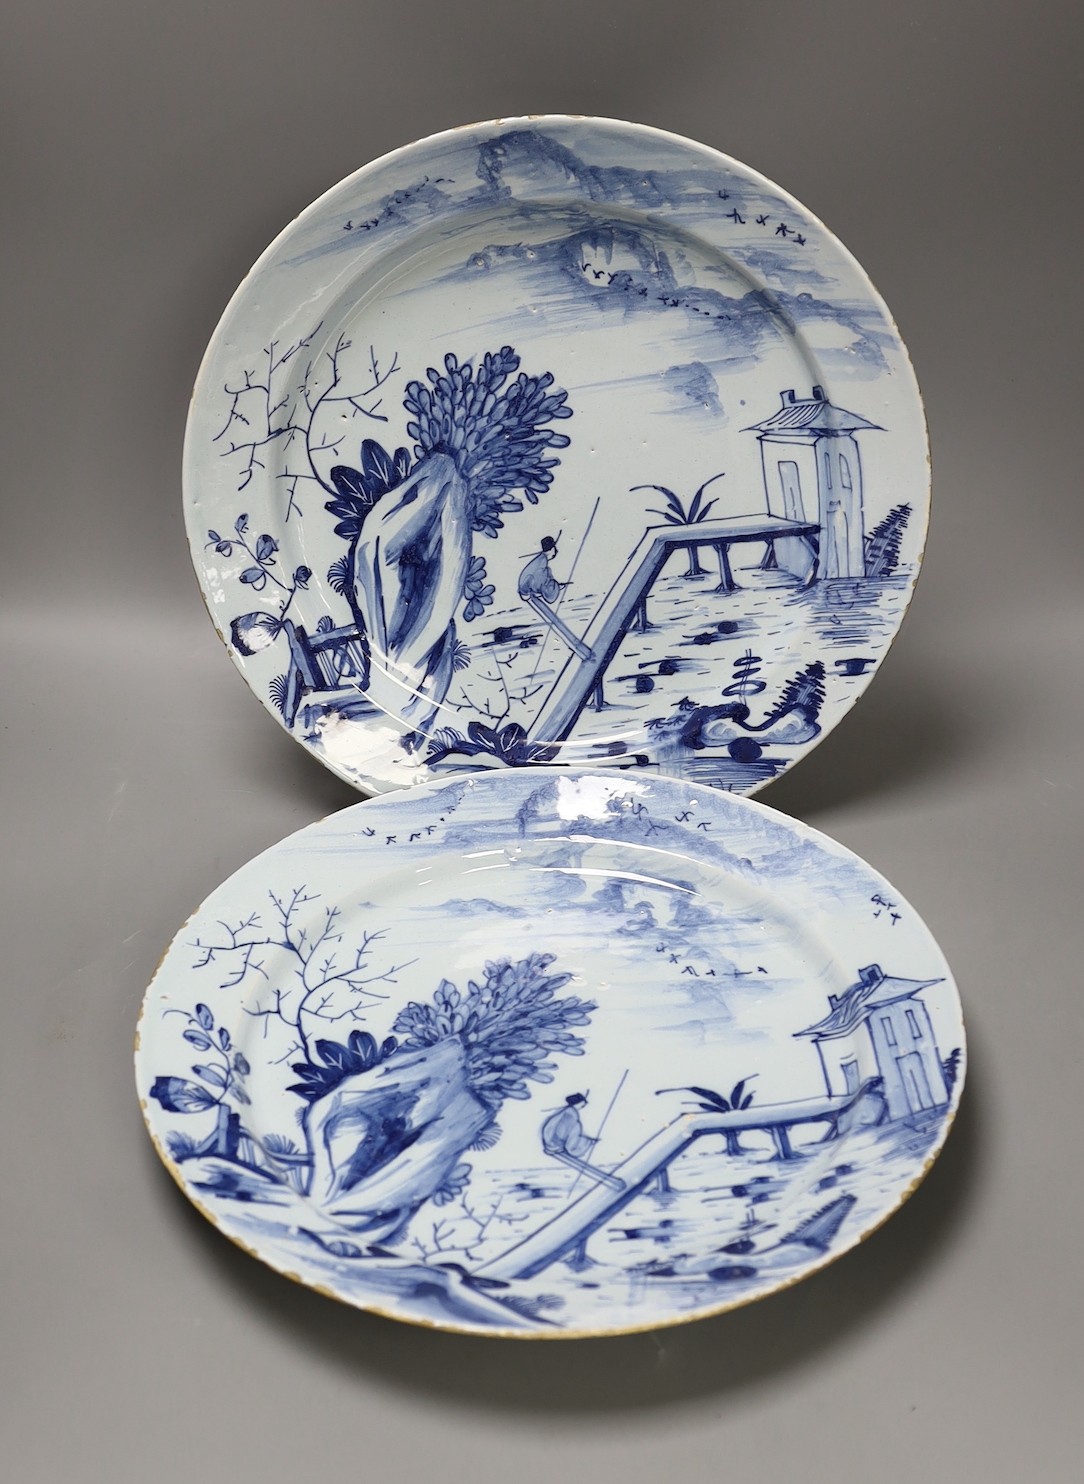 A pair of mid 18th century Delft blue and white chargers, 33.5cm diameter